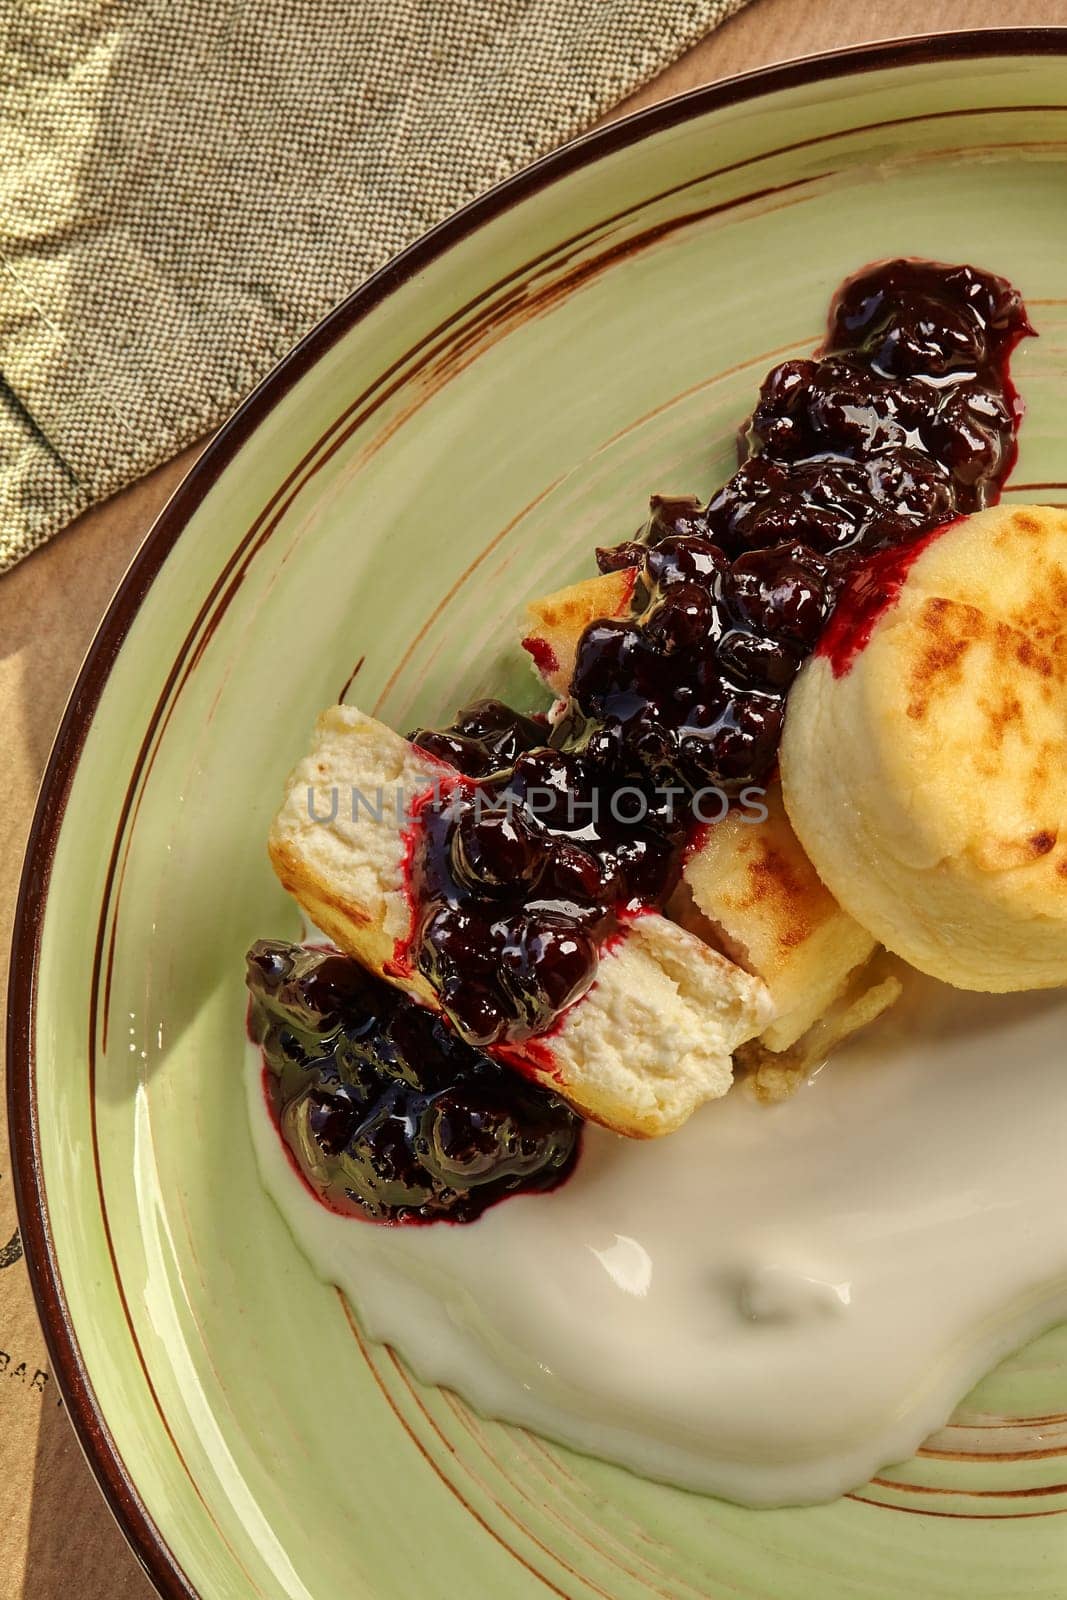 Homemade sweet syrniki topped with creamy cheese cream and rich berry jam, served on rustic ceramic plate